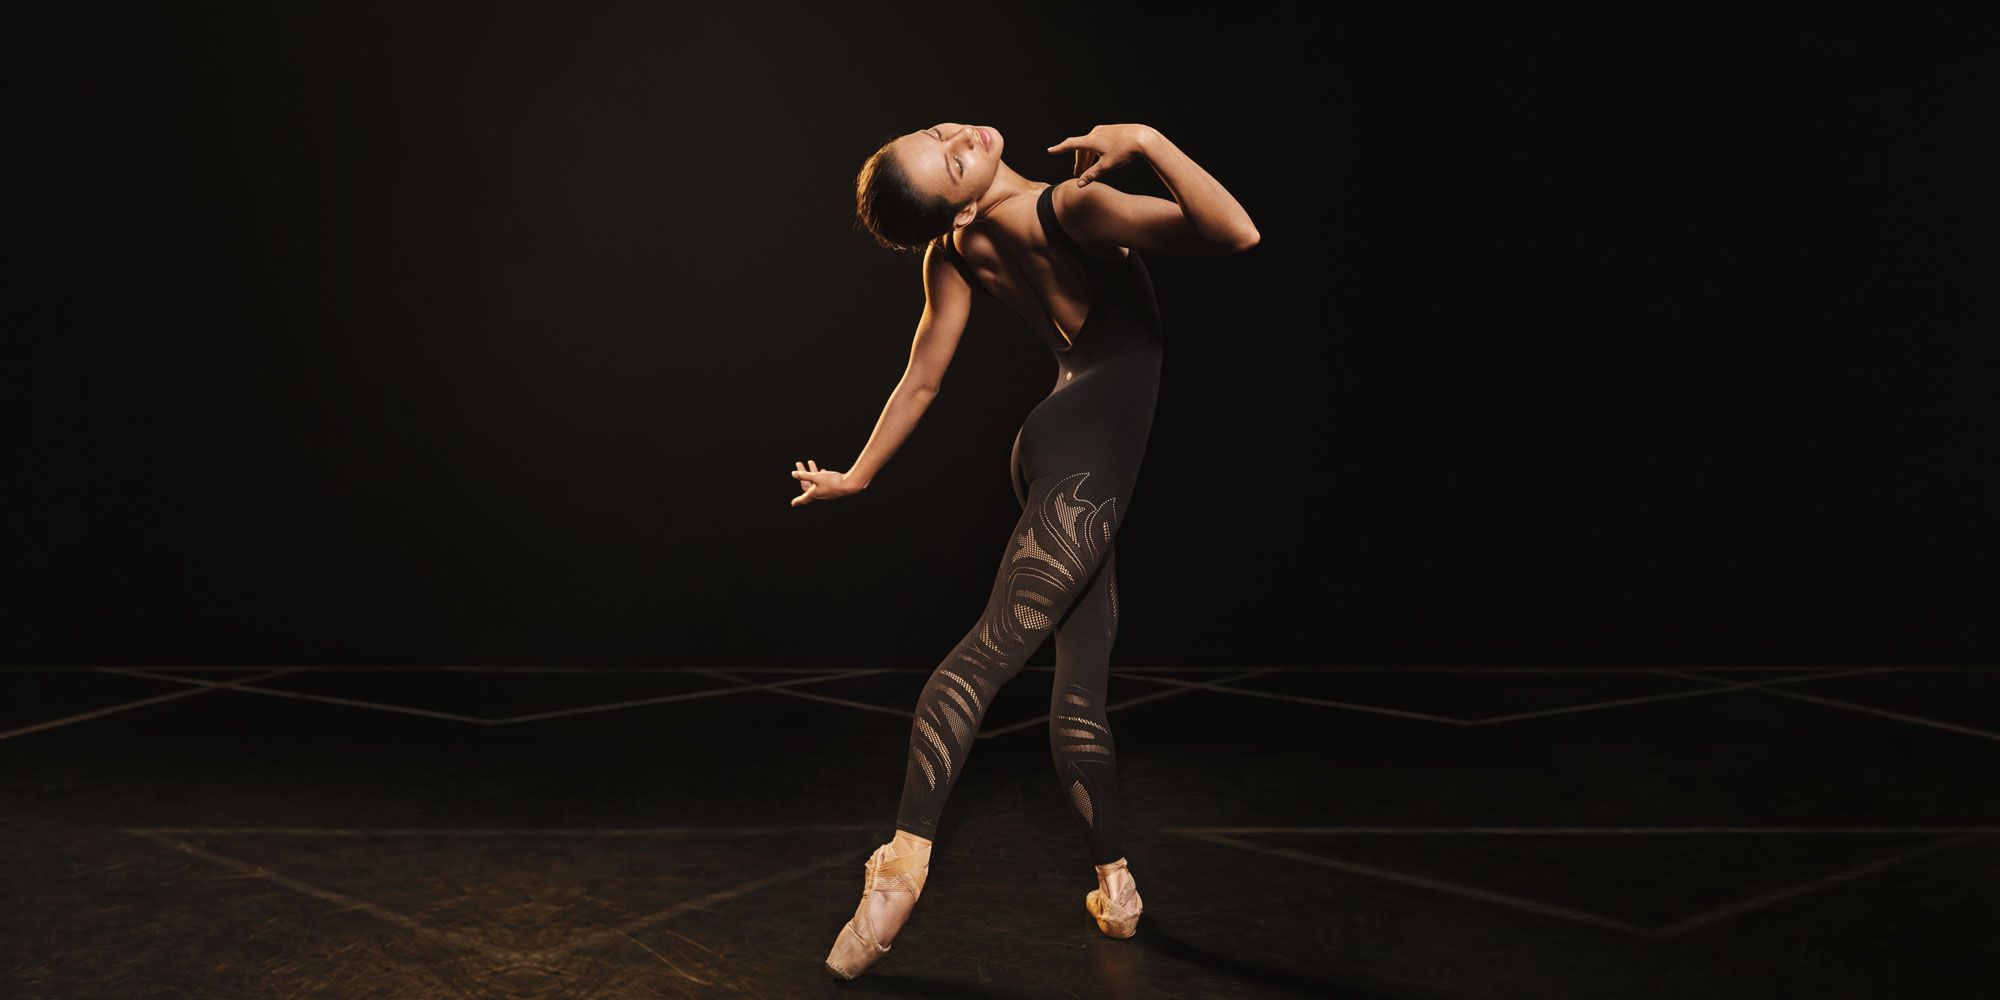 Lululemon Have A New Dance Collection And We Know You'll Like It